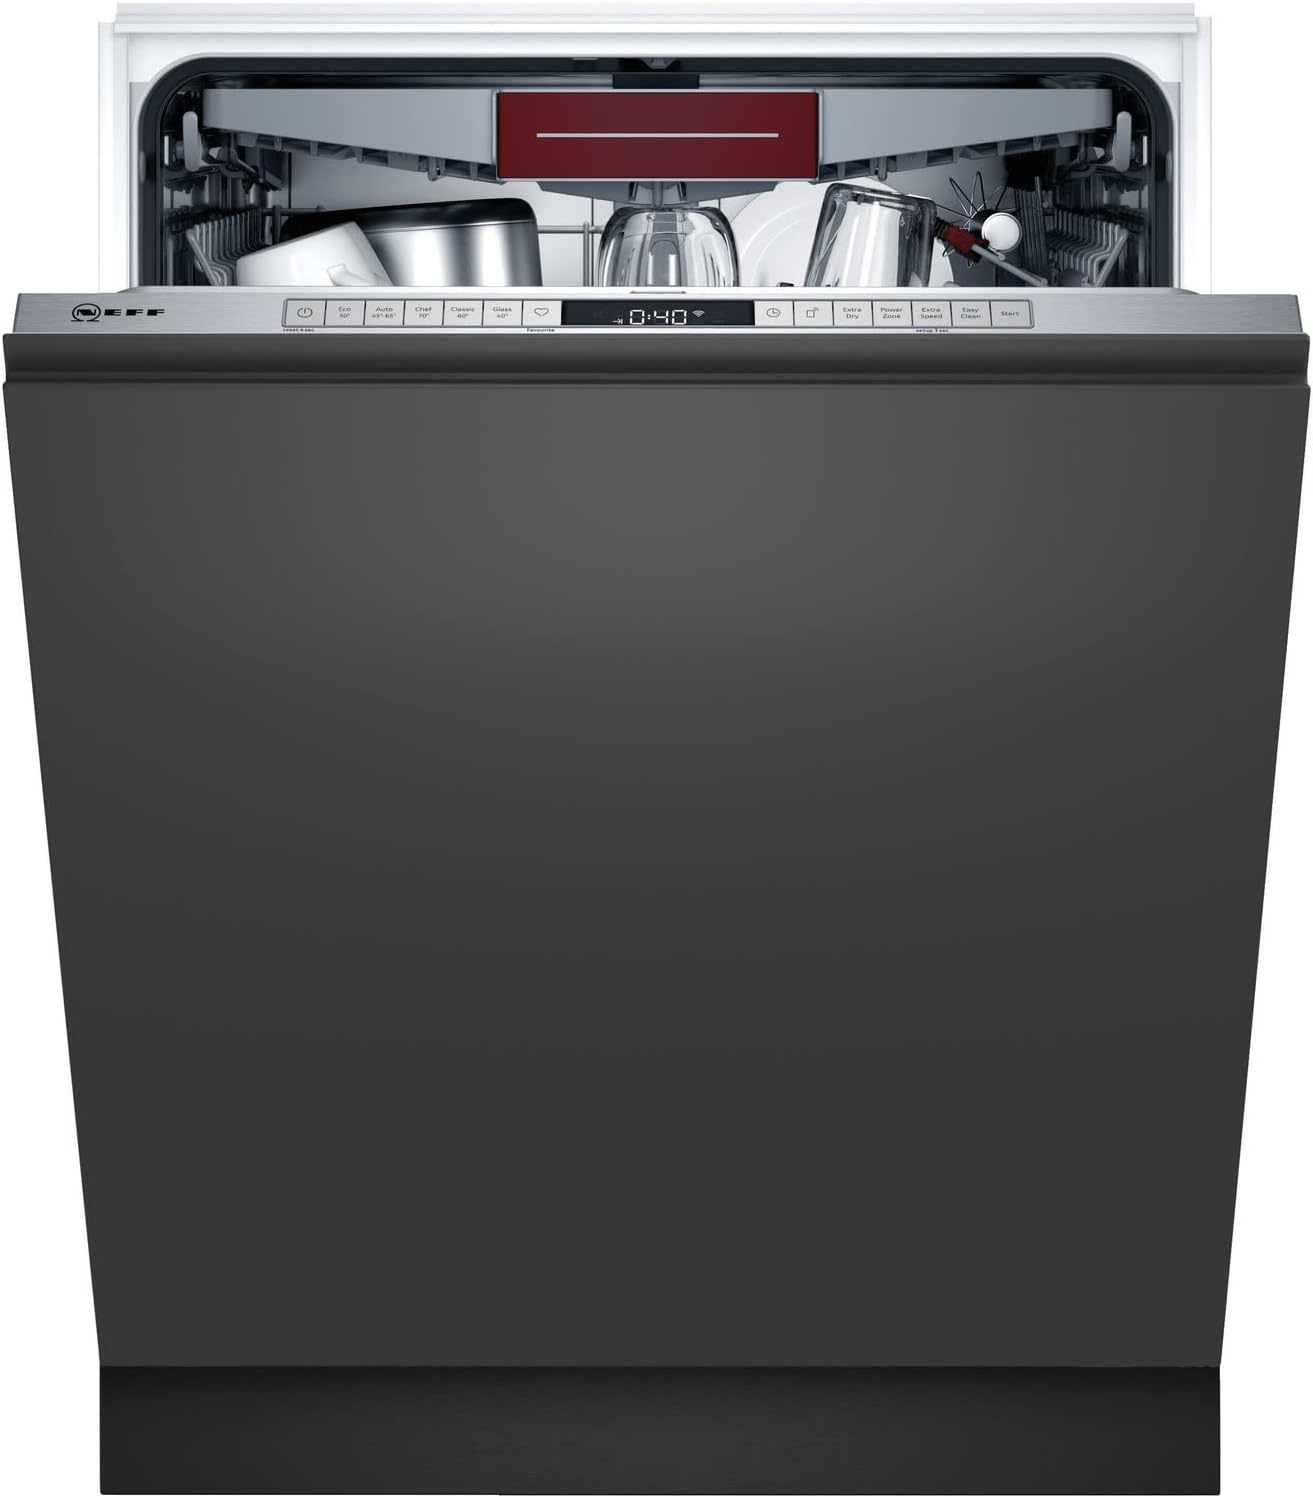 Neff S155HCX27G N50 Fully Integrated Dishwasher, 14 place settings, TimeLight, 46dB, Flex Basket, Flex Cutlery Drawer - Amazing Gadgets Outlet